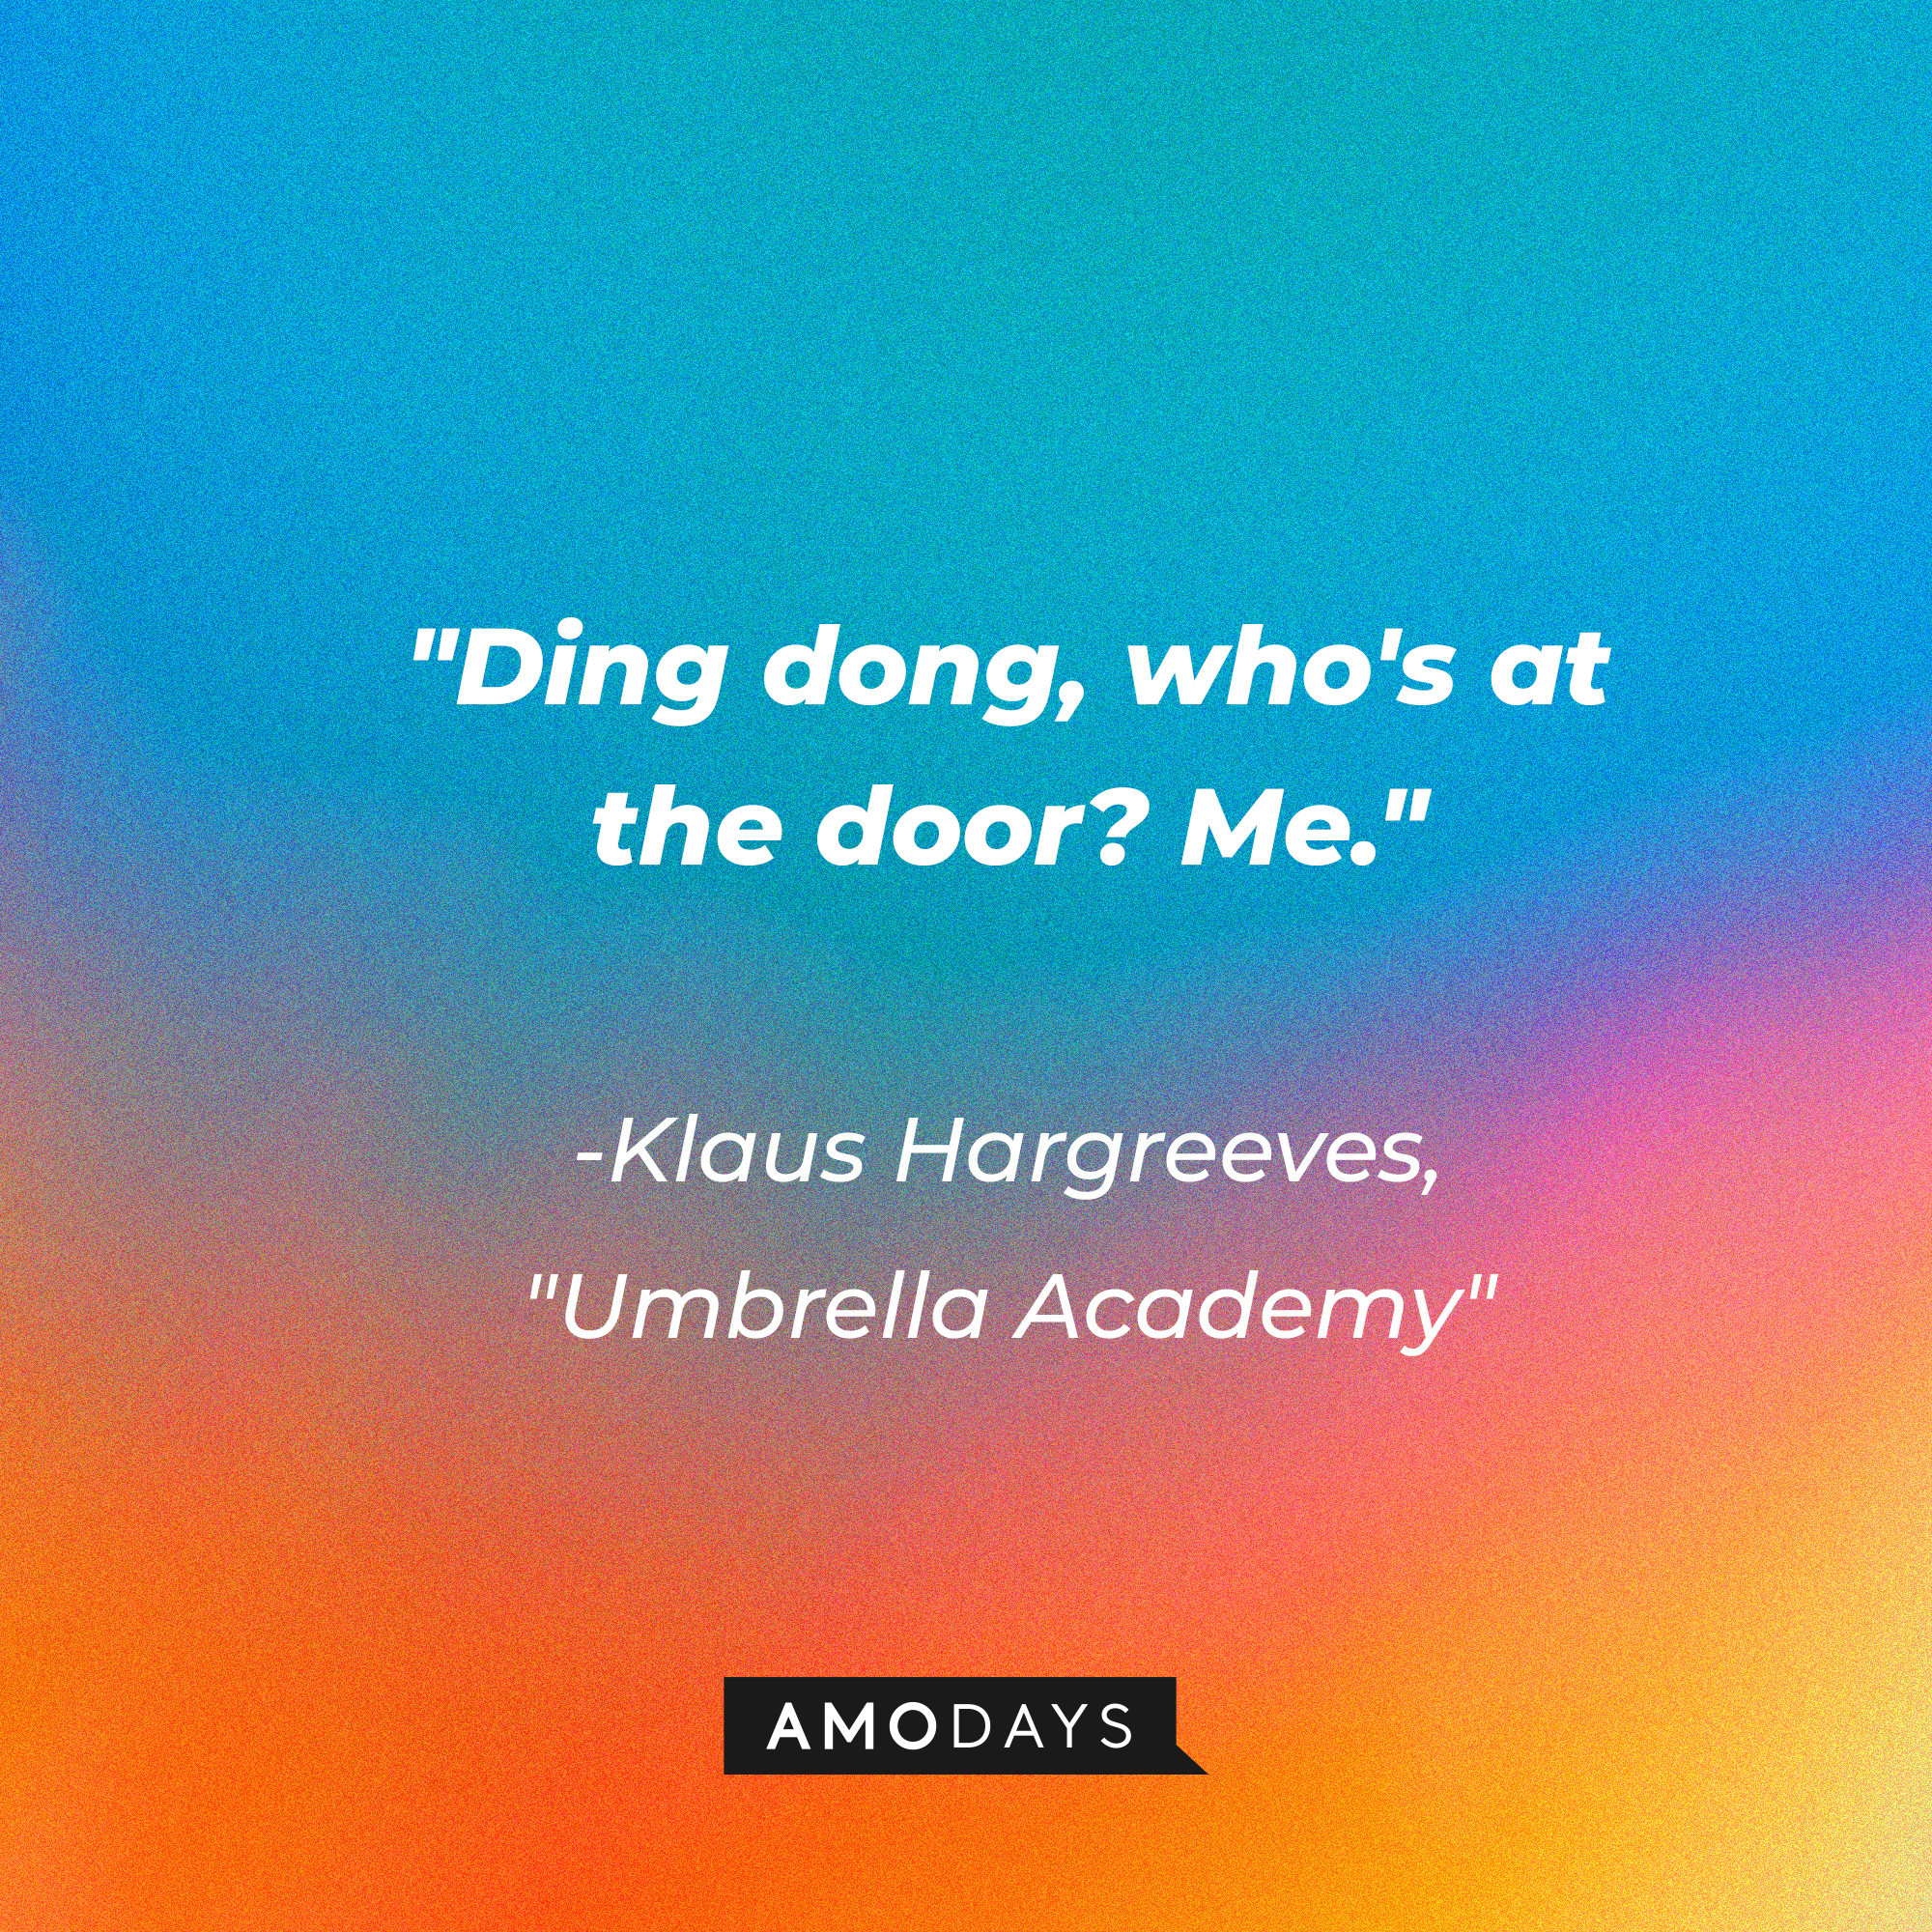 Klaus Hargreeves' quote in "The Umbrella Academy:" "Ding dong, who's at the door? Me." | Source: AmoDays